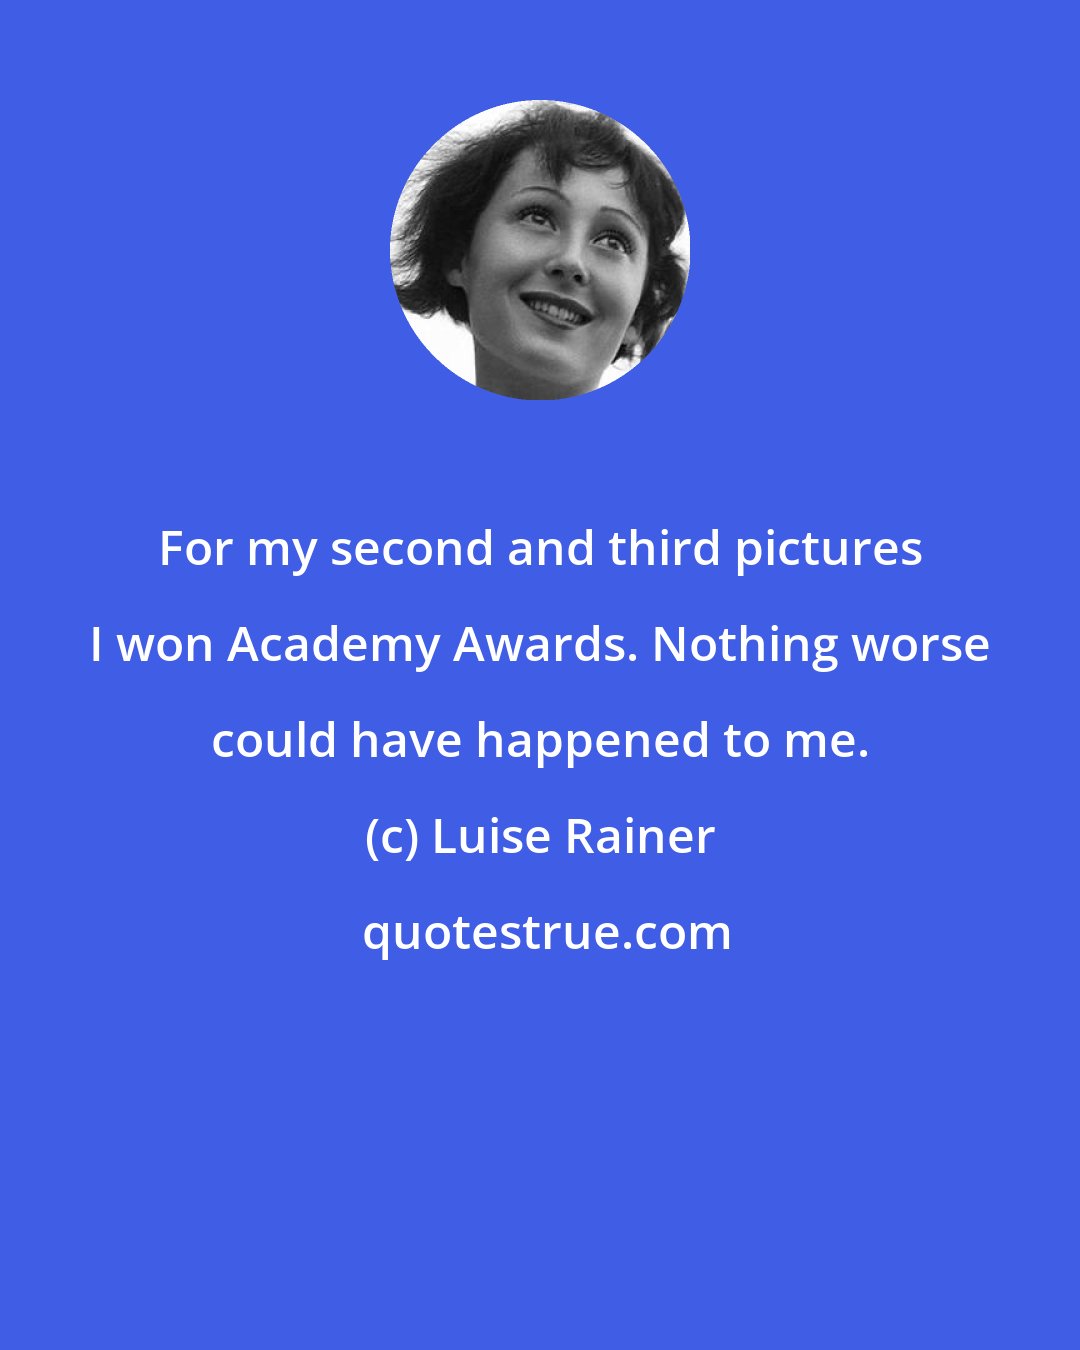 Luise Rainer: For my second and third pictures I won Academy Awards. Nothing worse could have happened to me.